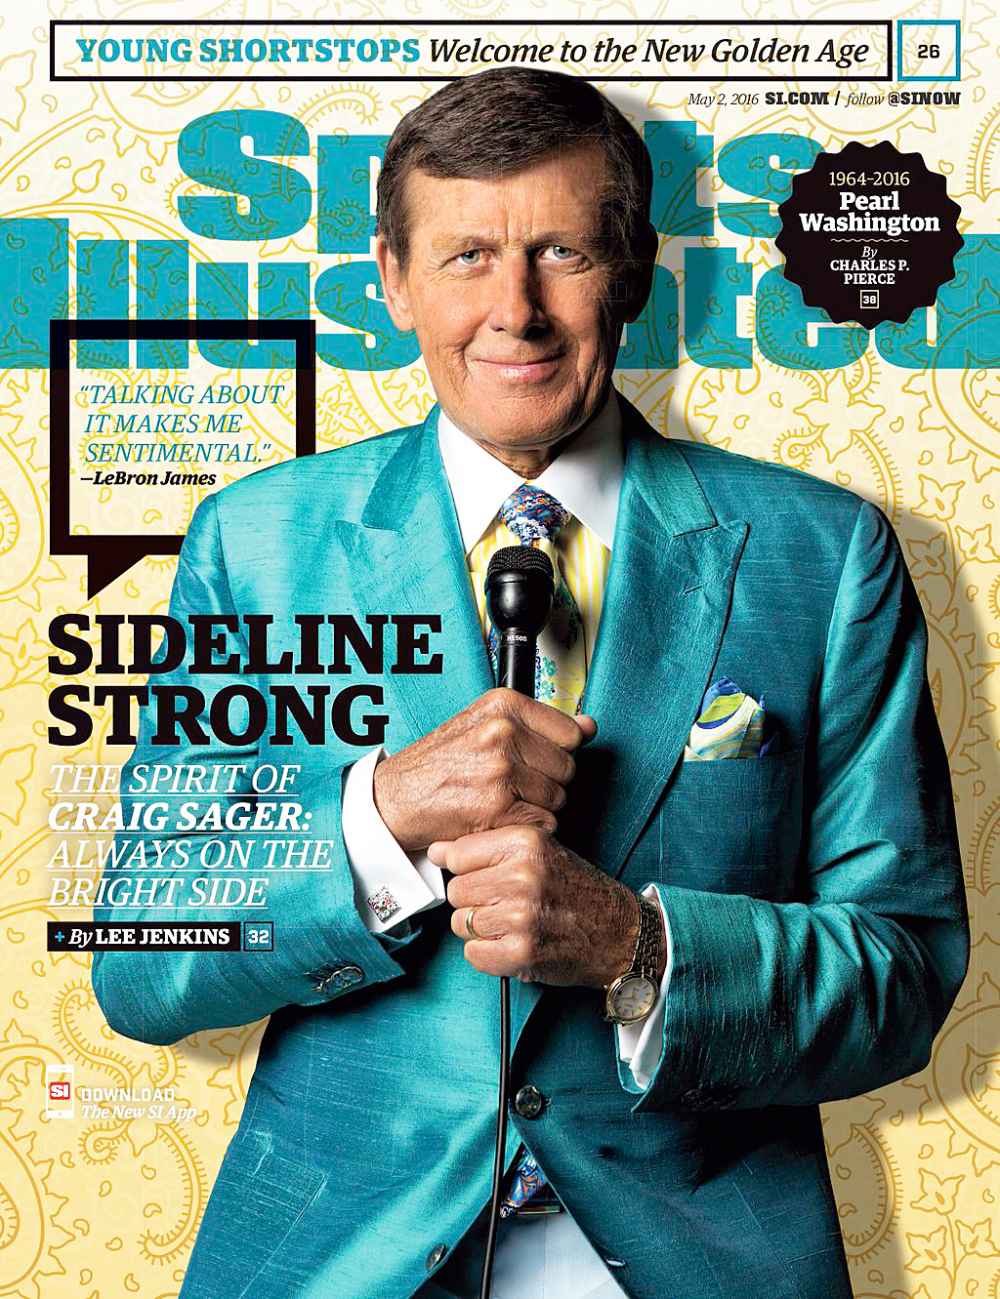 Craig Sager on the cover of 'Sports Illustrated'.